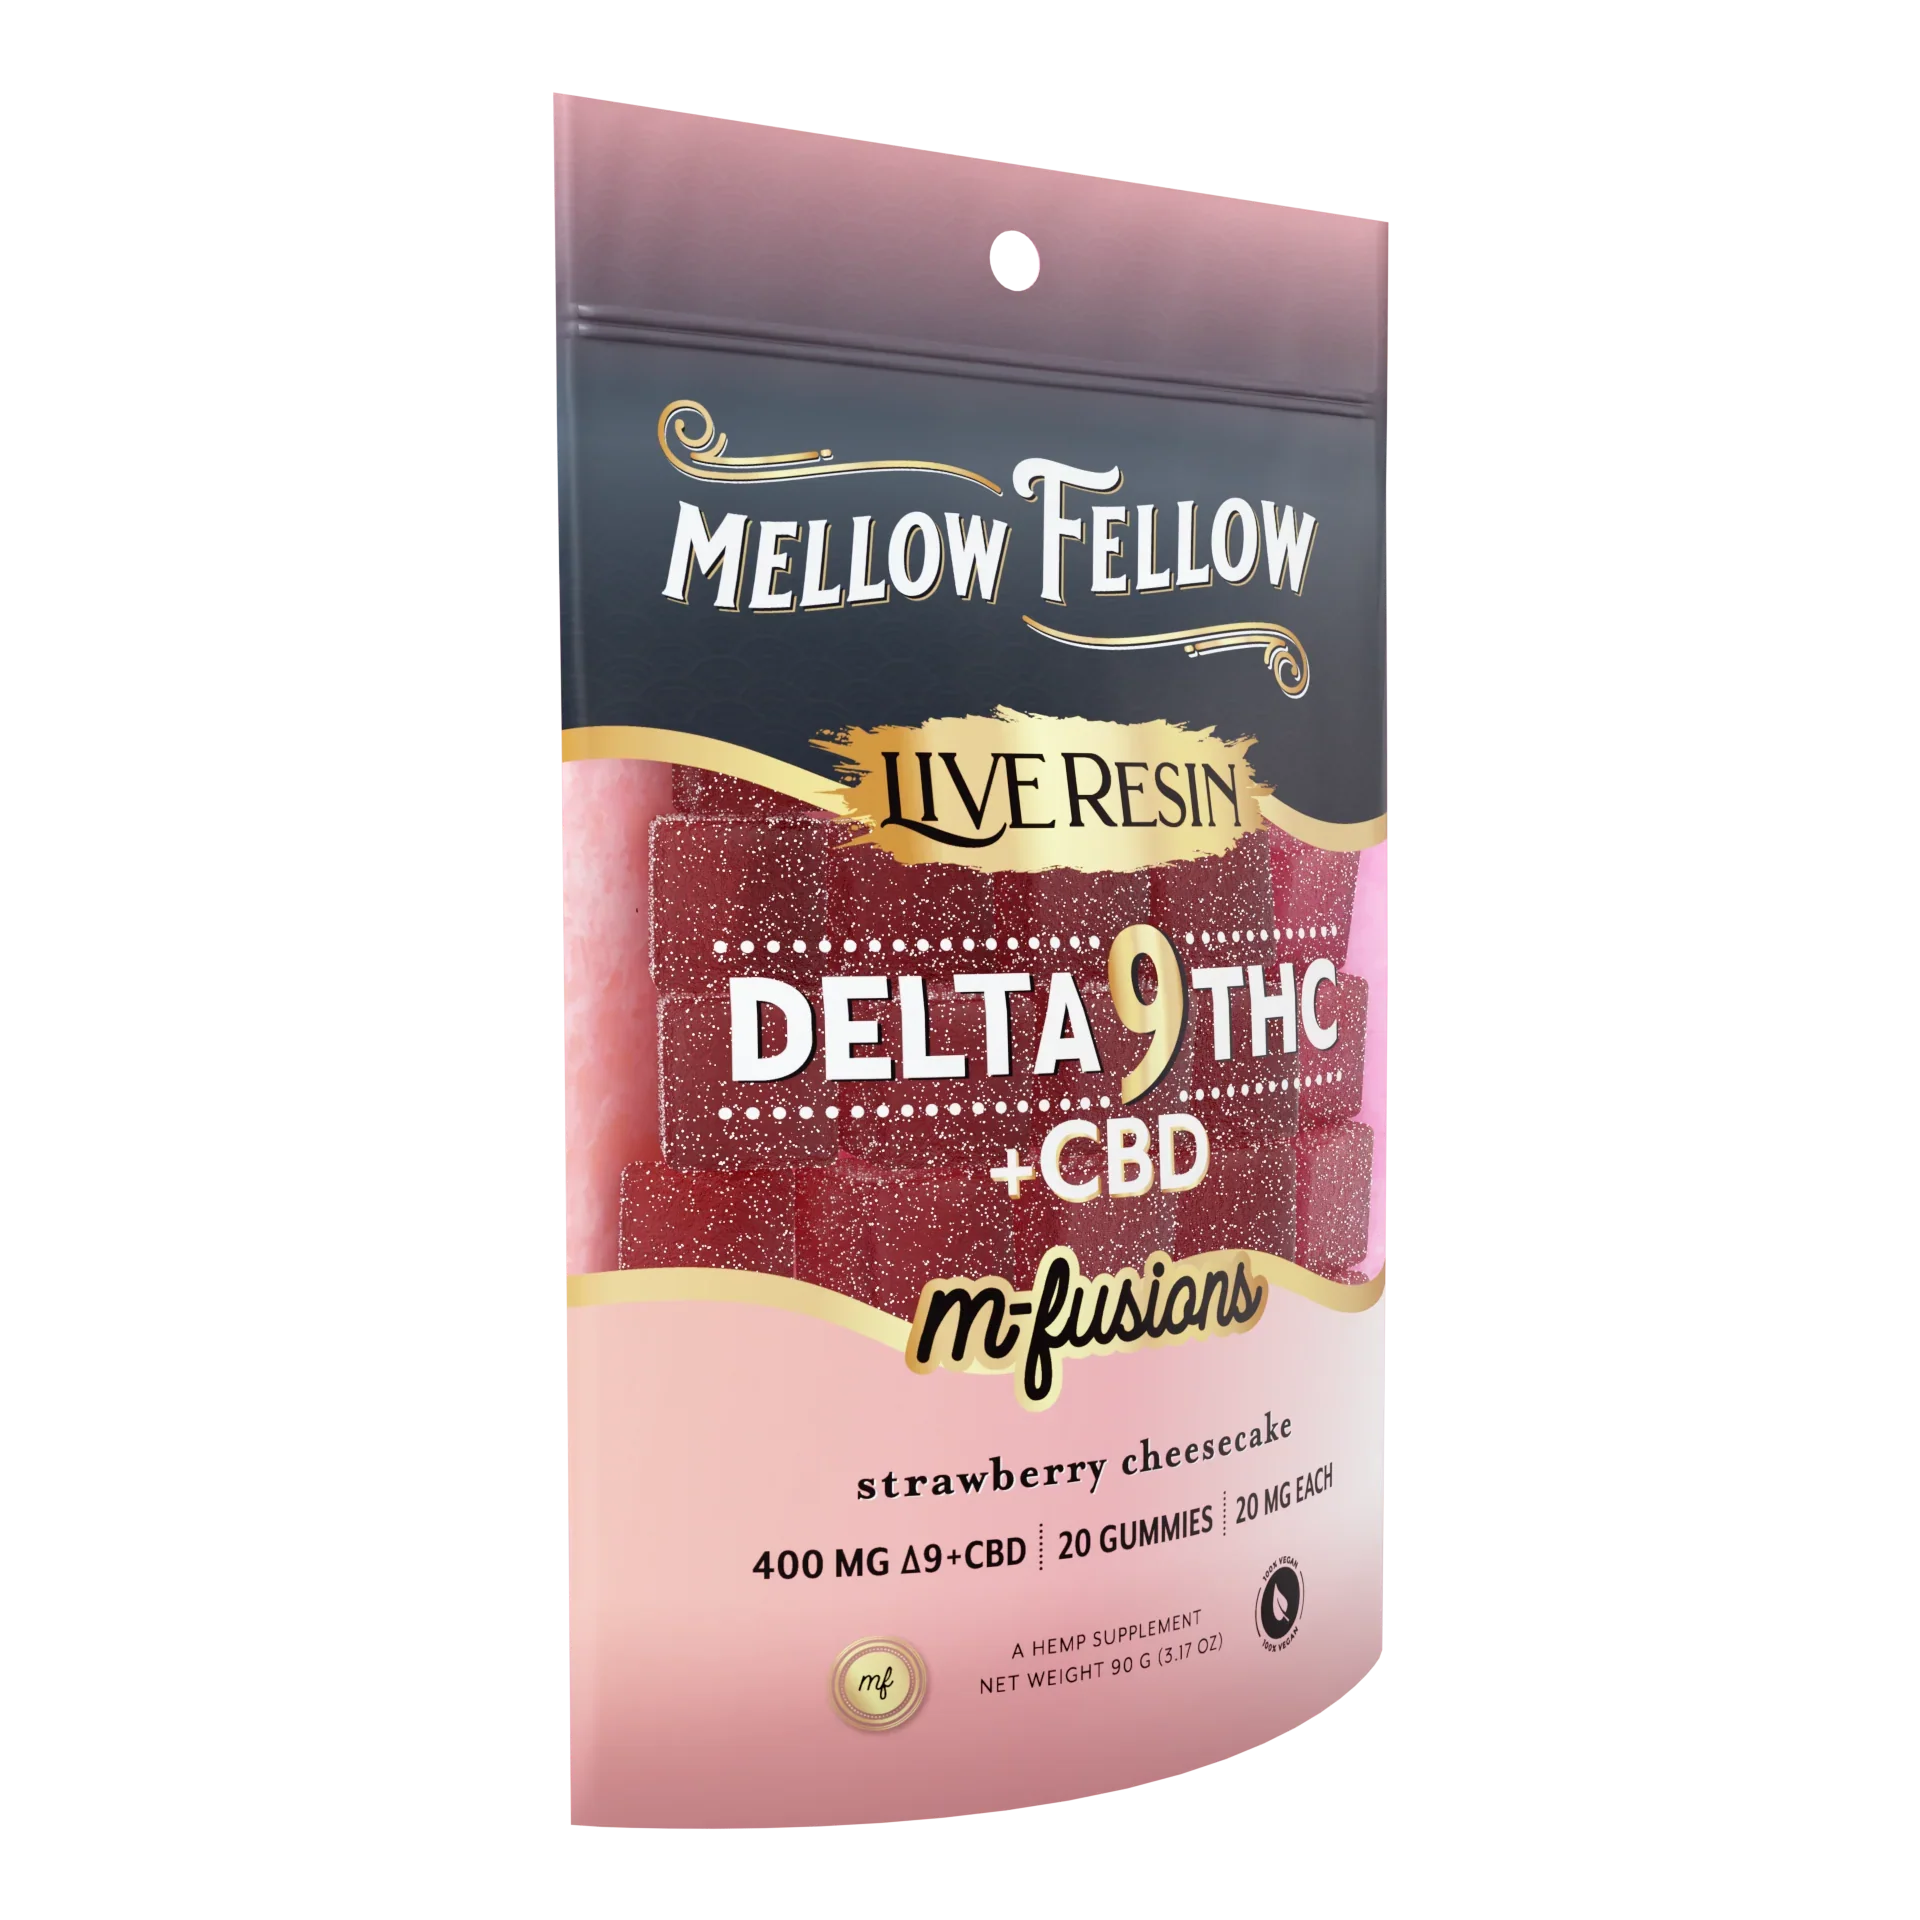 Mellow Fellow Delta 9 Live Resin Edibles 400mg - Strawberry Cheesecake Best Price